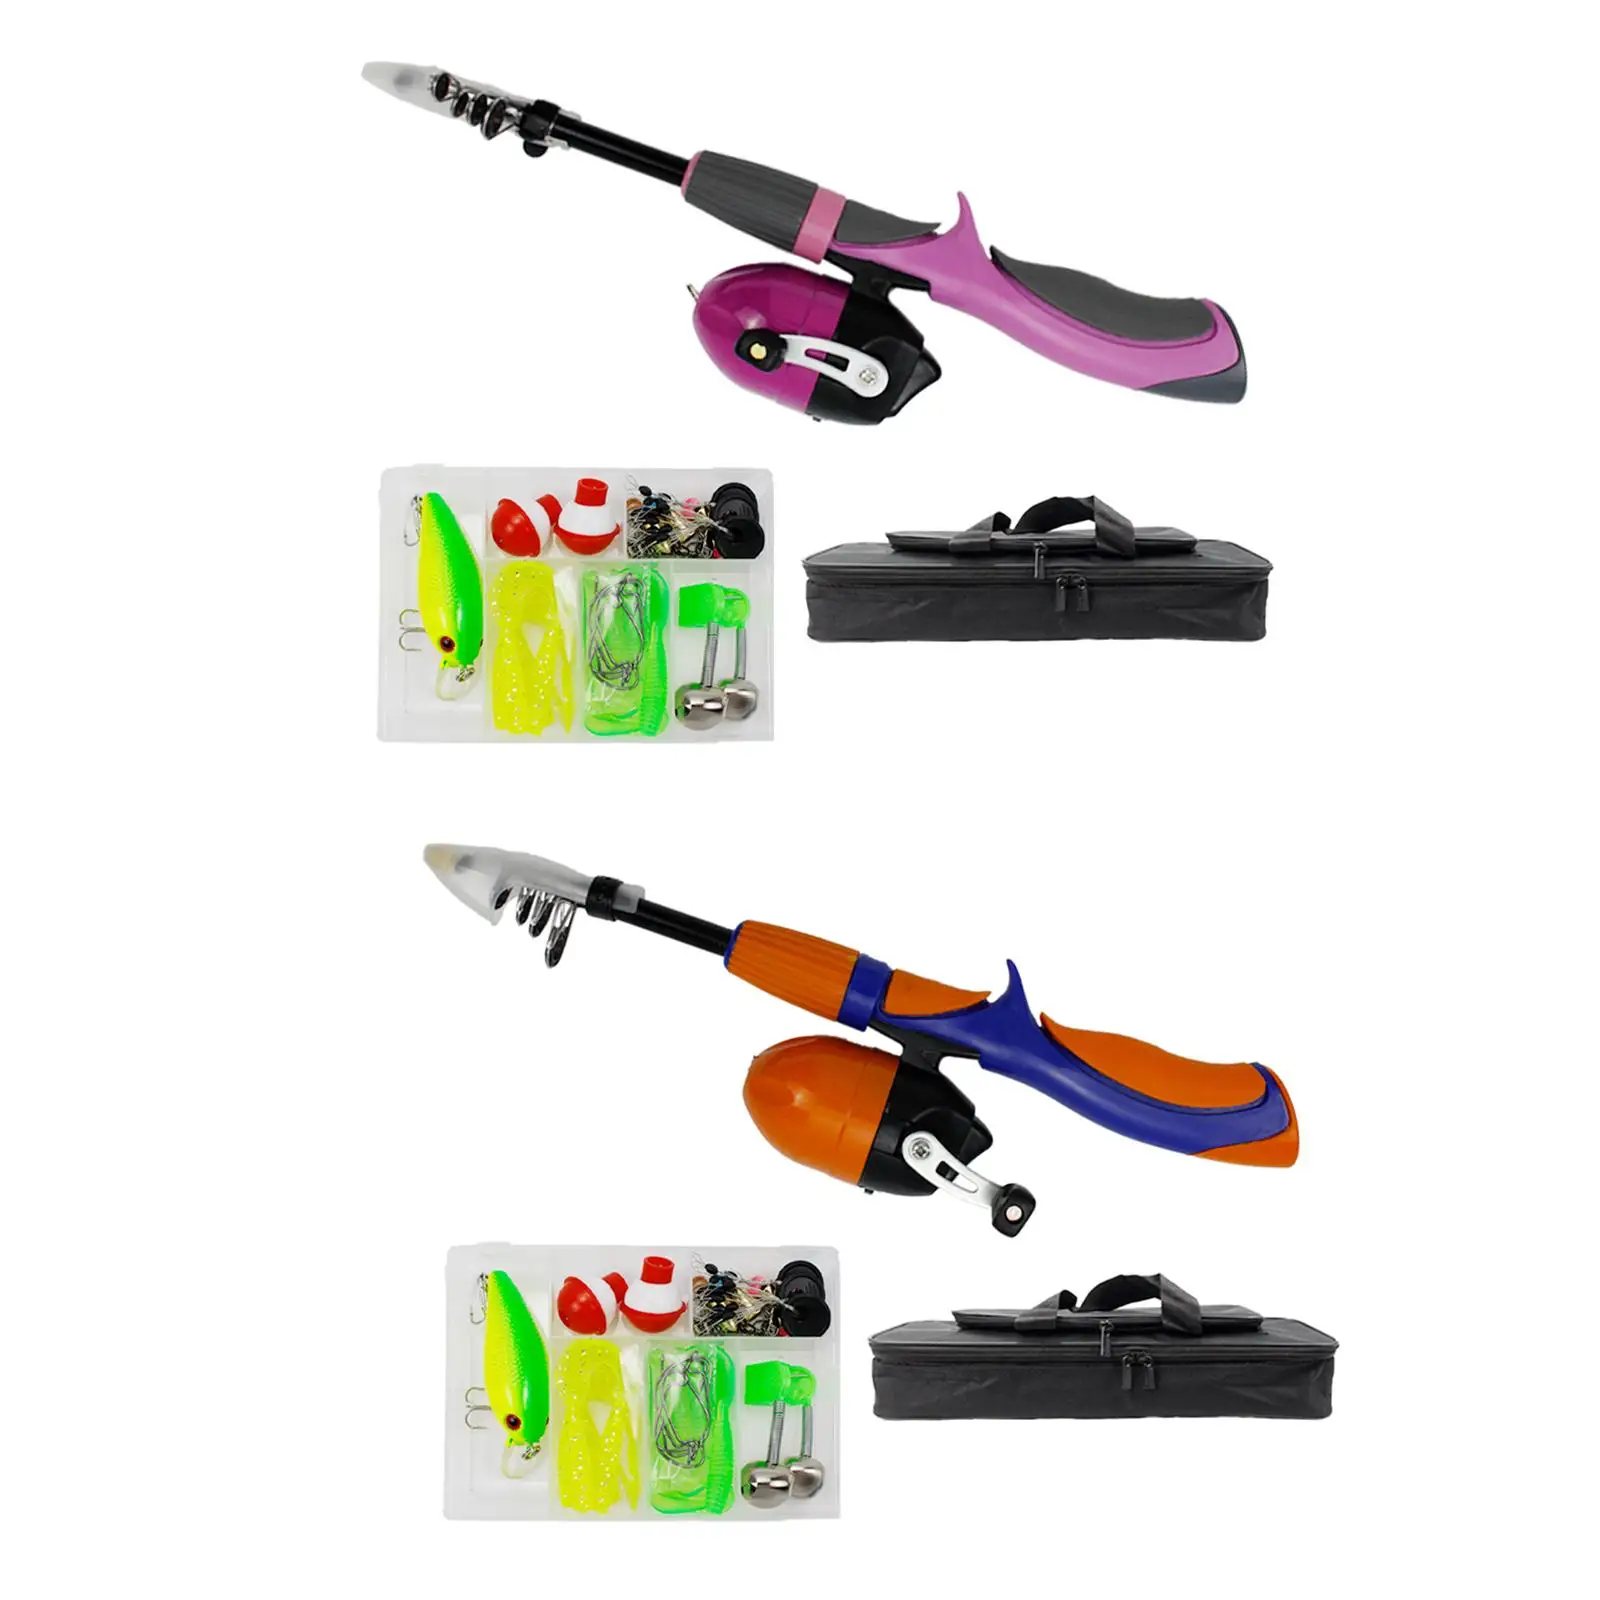 Kids Fishing Pole Spincasting Reel Tackle Box Telescopic Rod and Reel Carrier Bags Gift Fishing Gears for Youth Toddler Angler